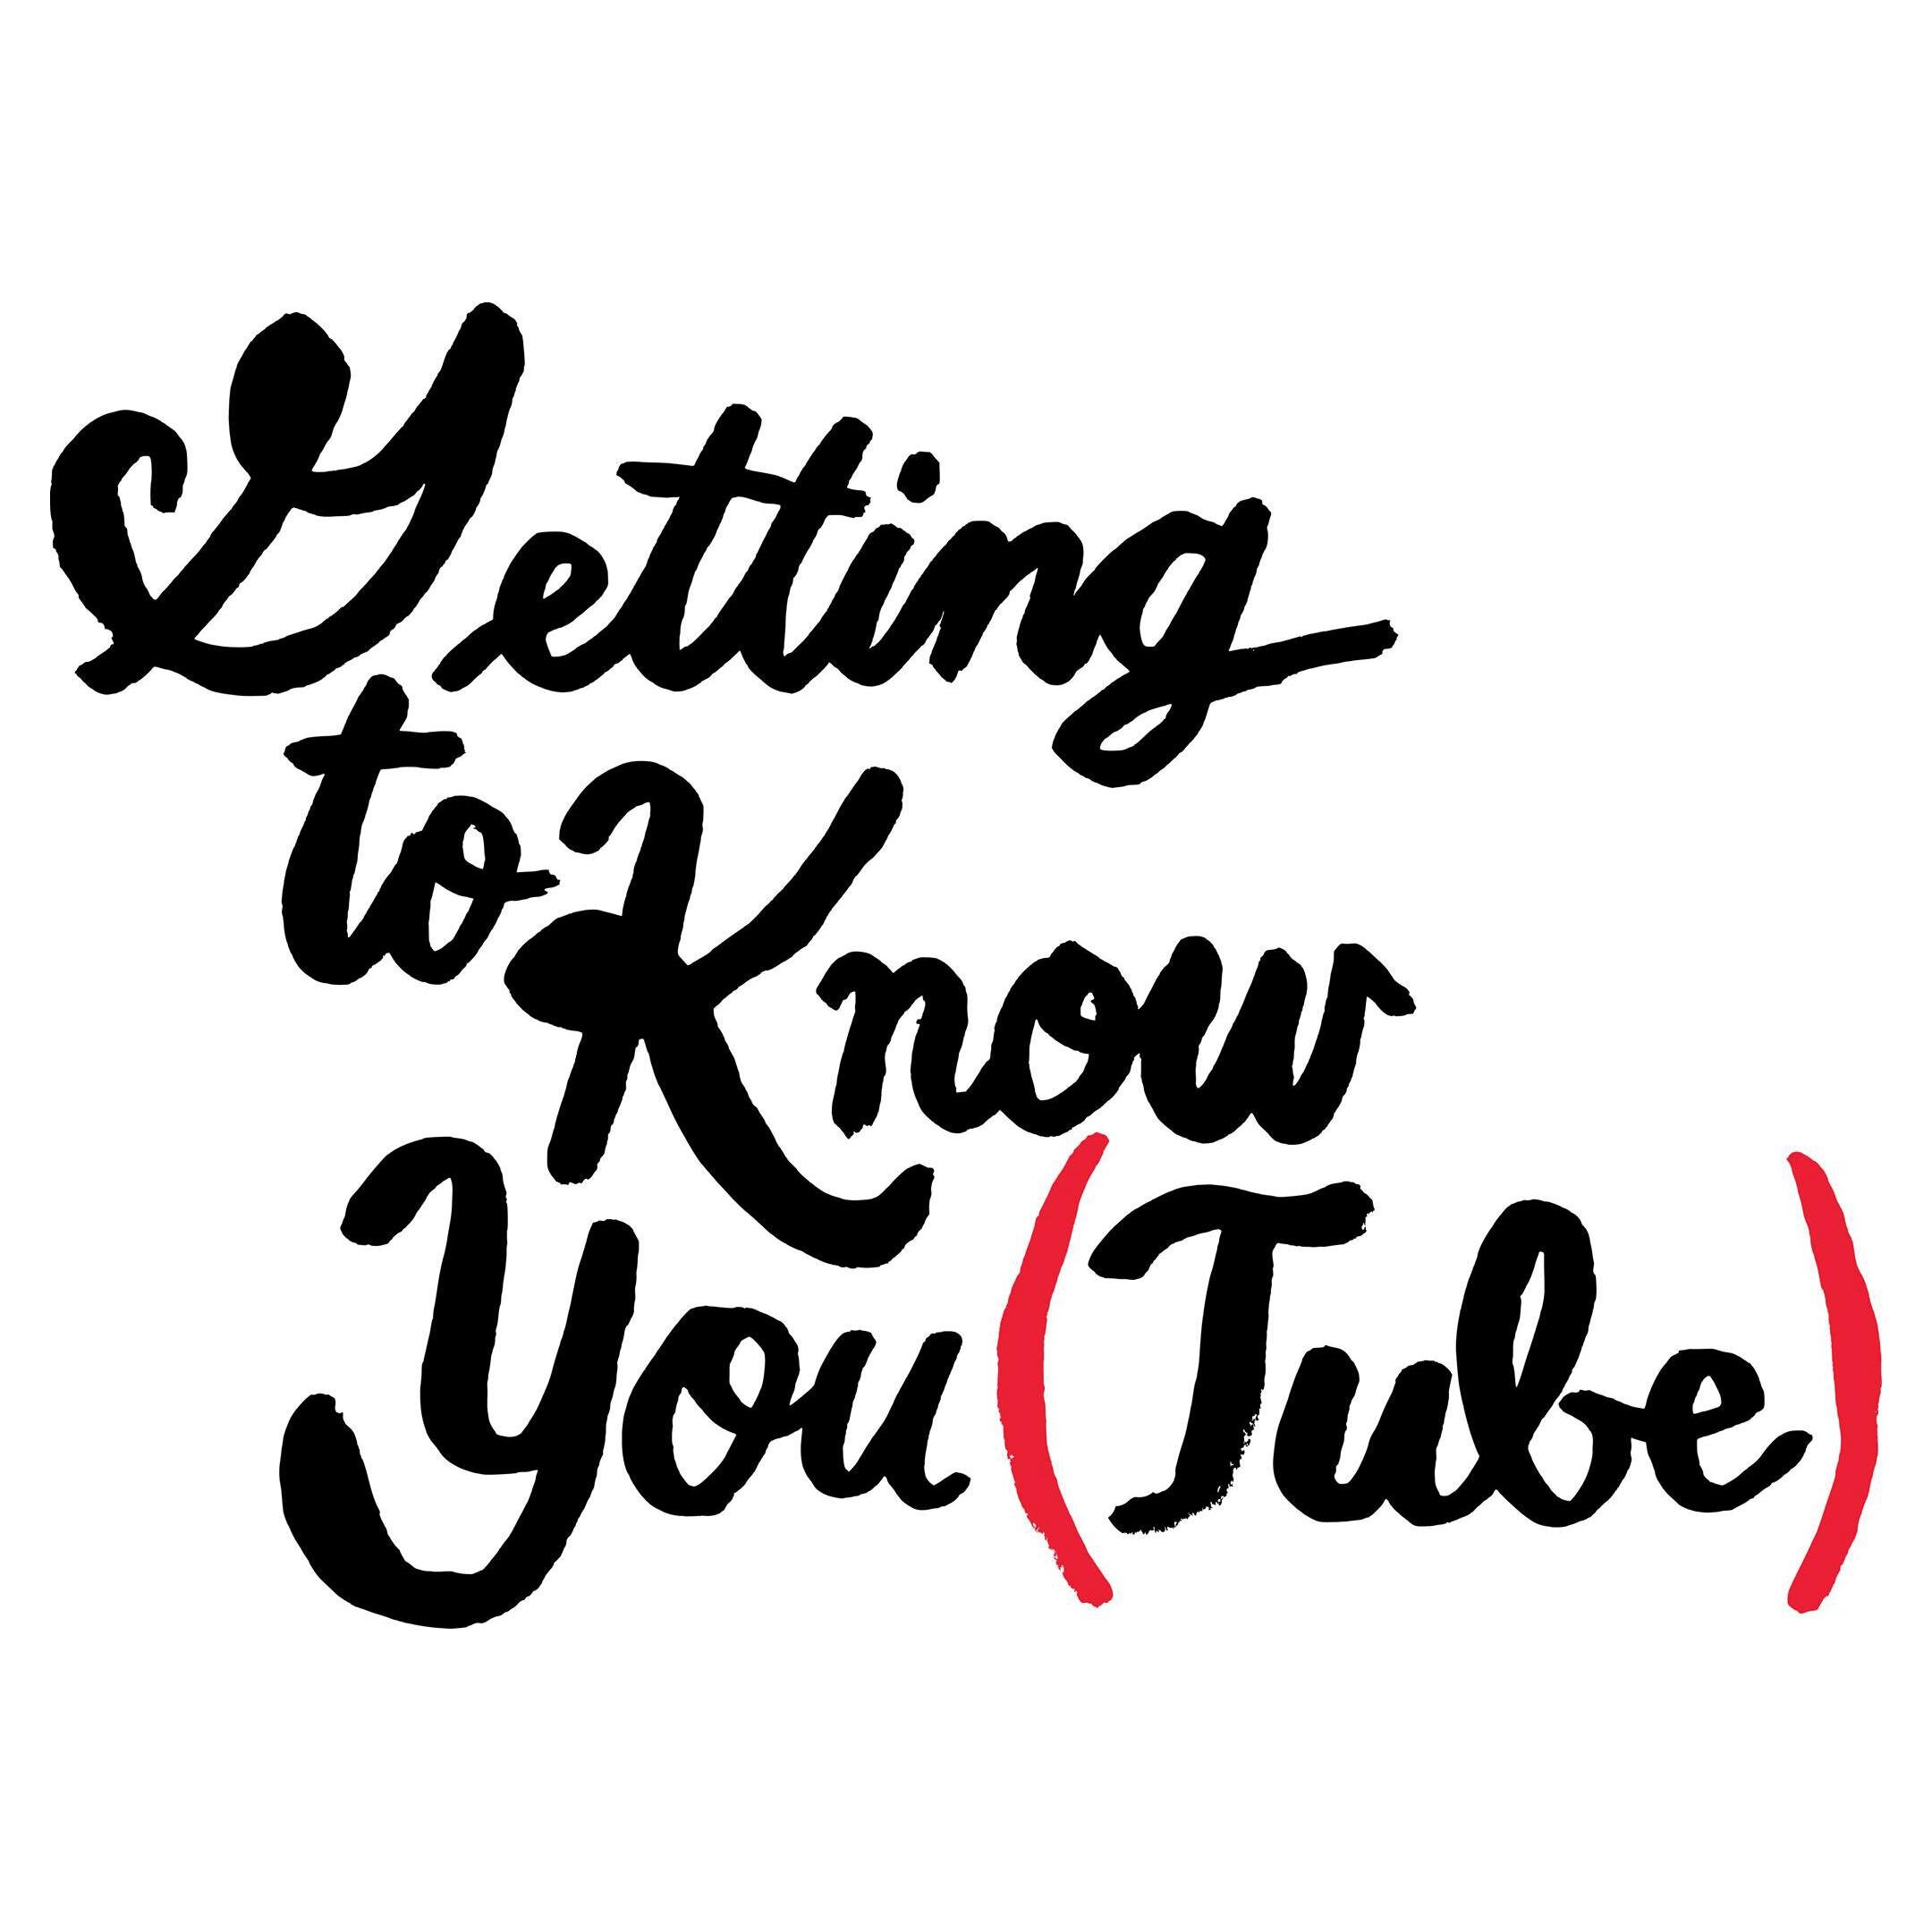 Getting to Know You(Tube) is a participatory YouTube video sharing series. Monthly at the @HollywoodTheatr + other places.